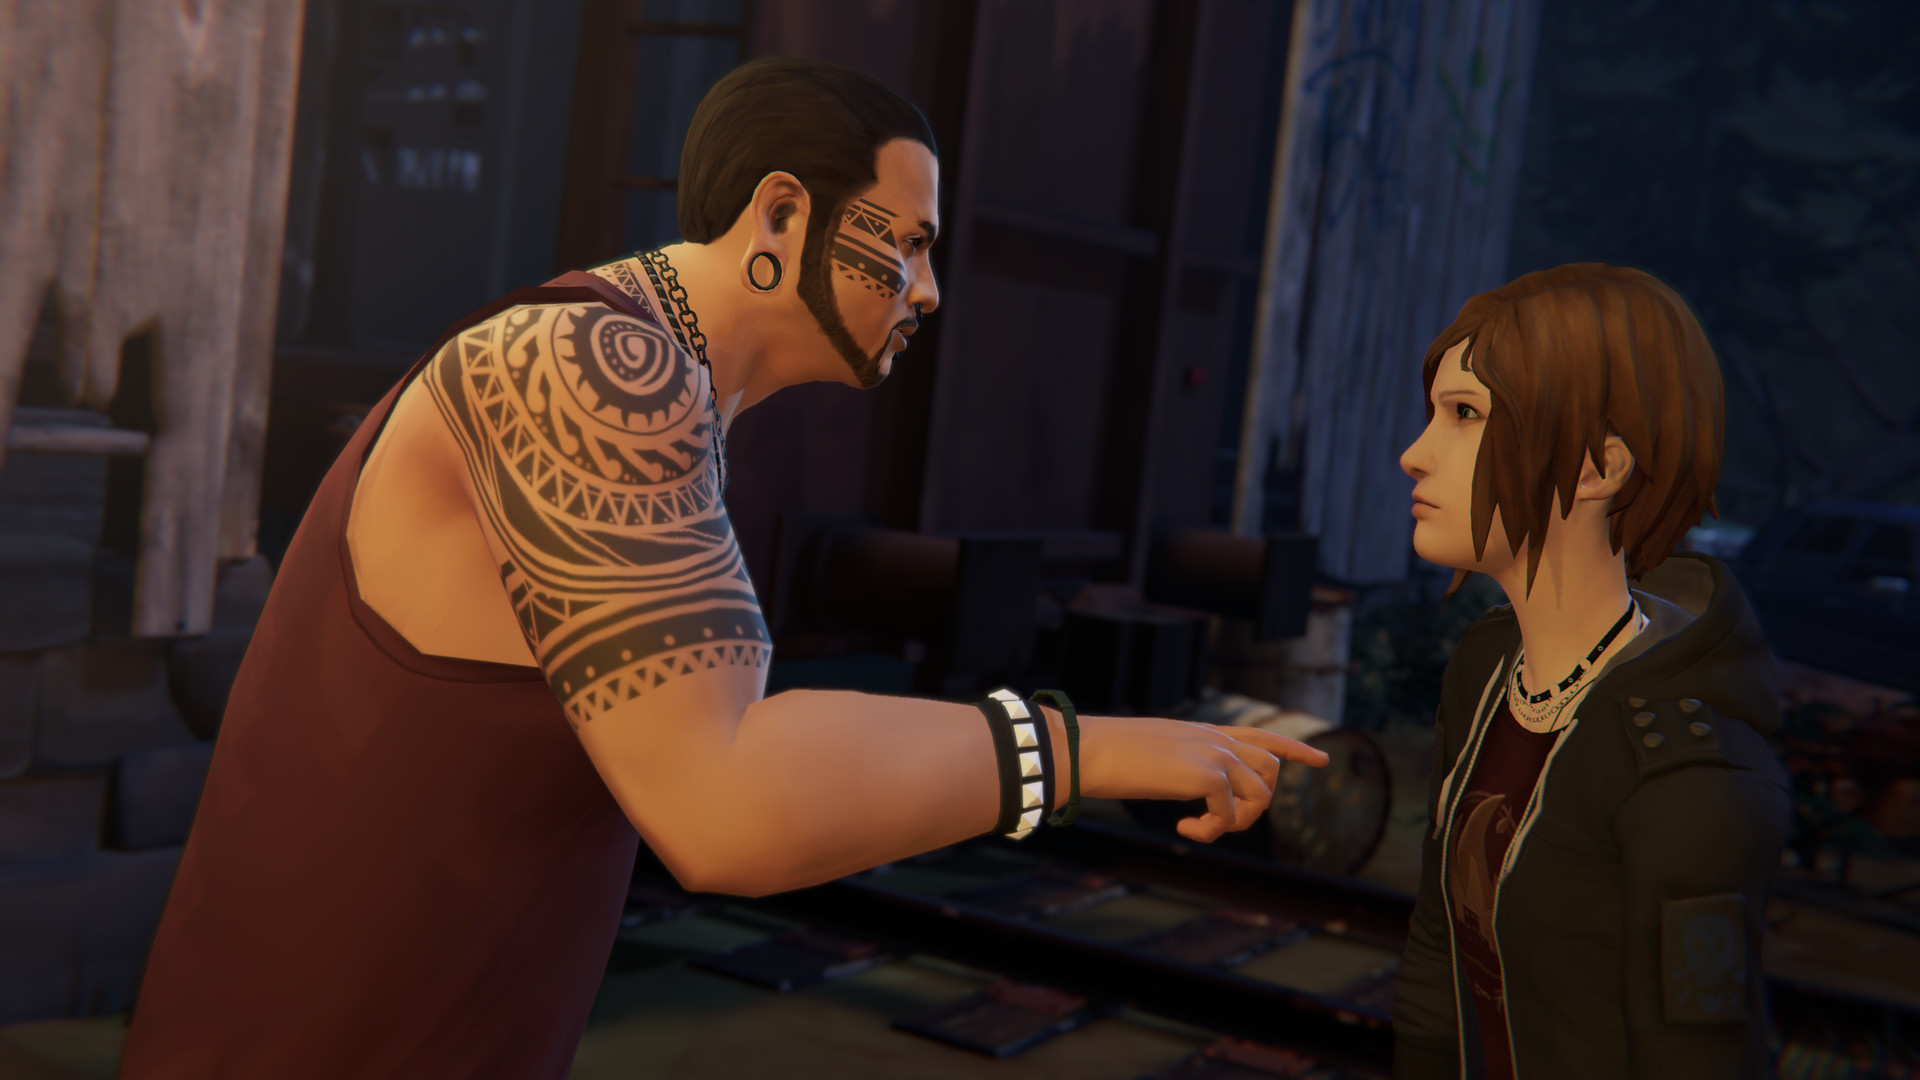 Life is Strange: Before the Storm DLC - Deluxe Upgrade Featured Screenshot #1